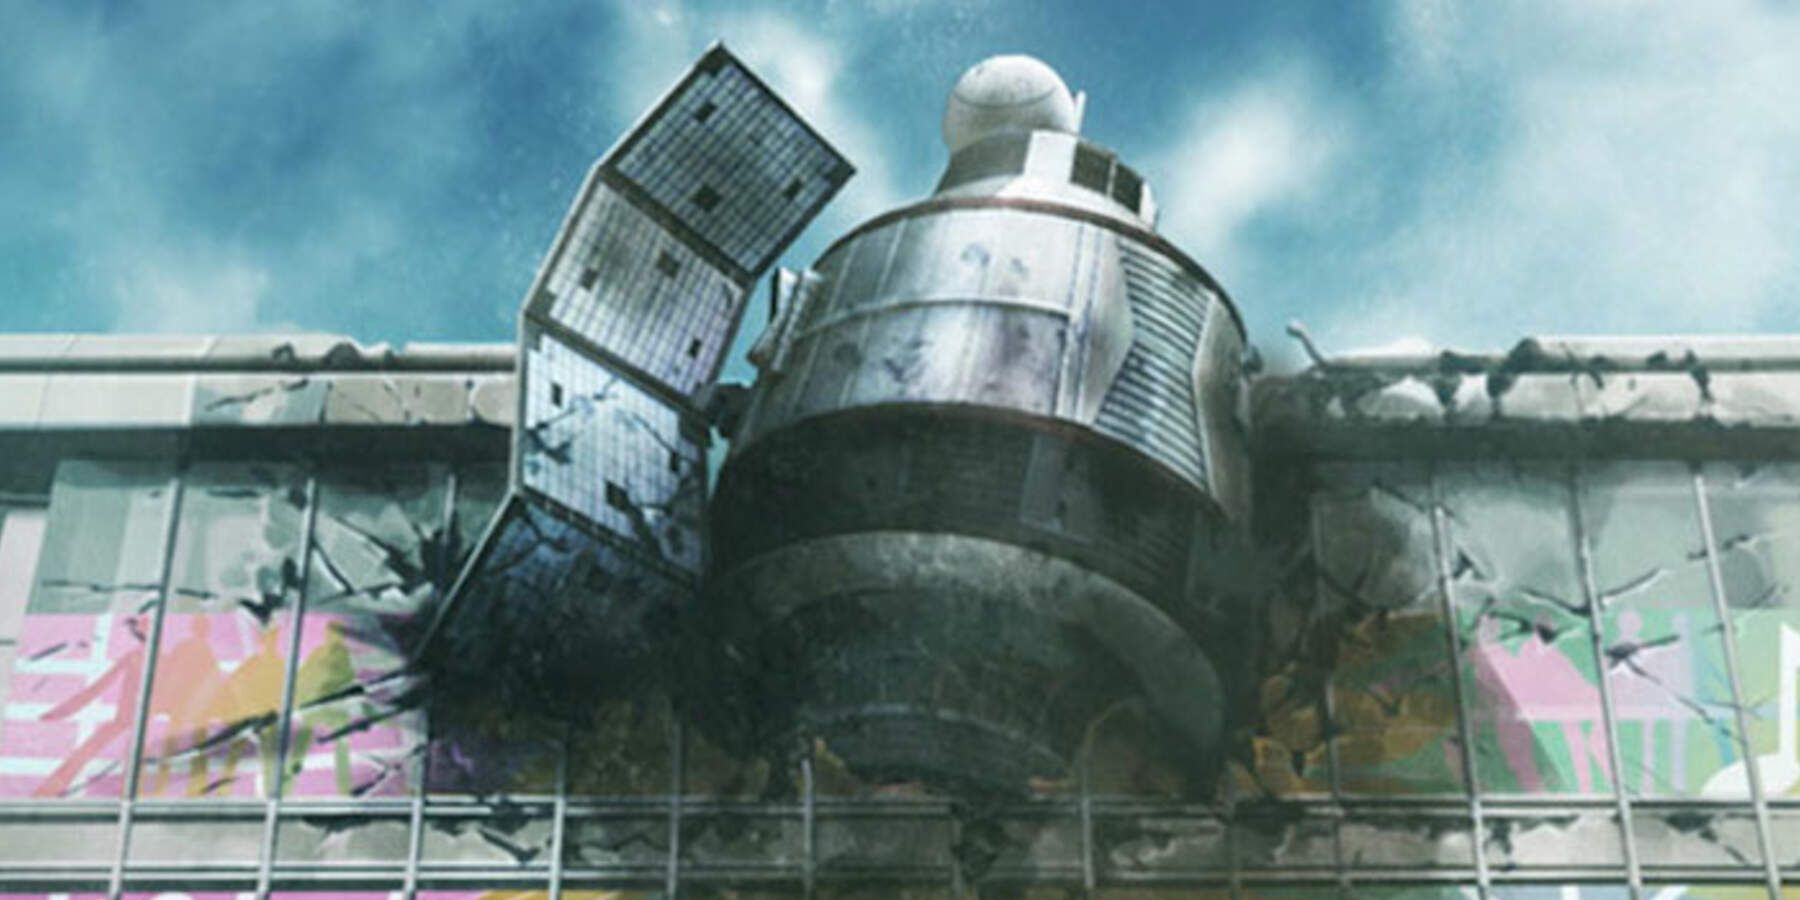 A satellite crashes into a building in the Steins Gate visual novel